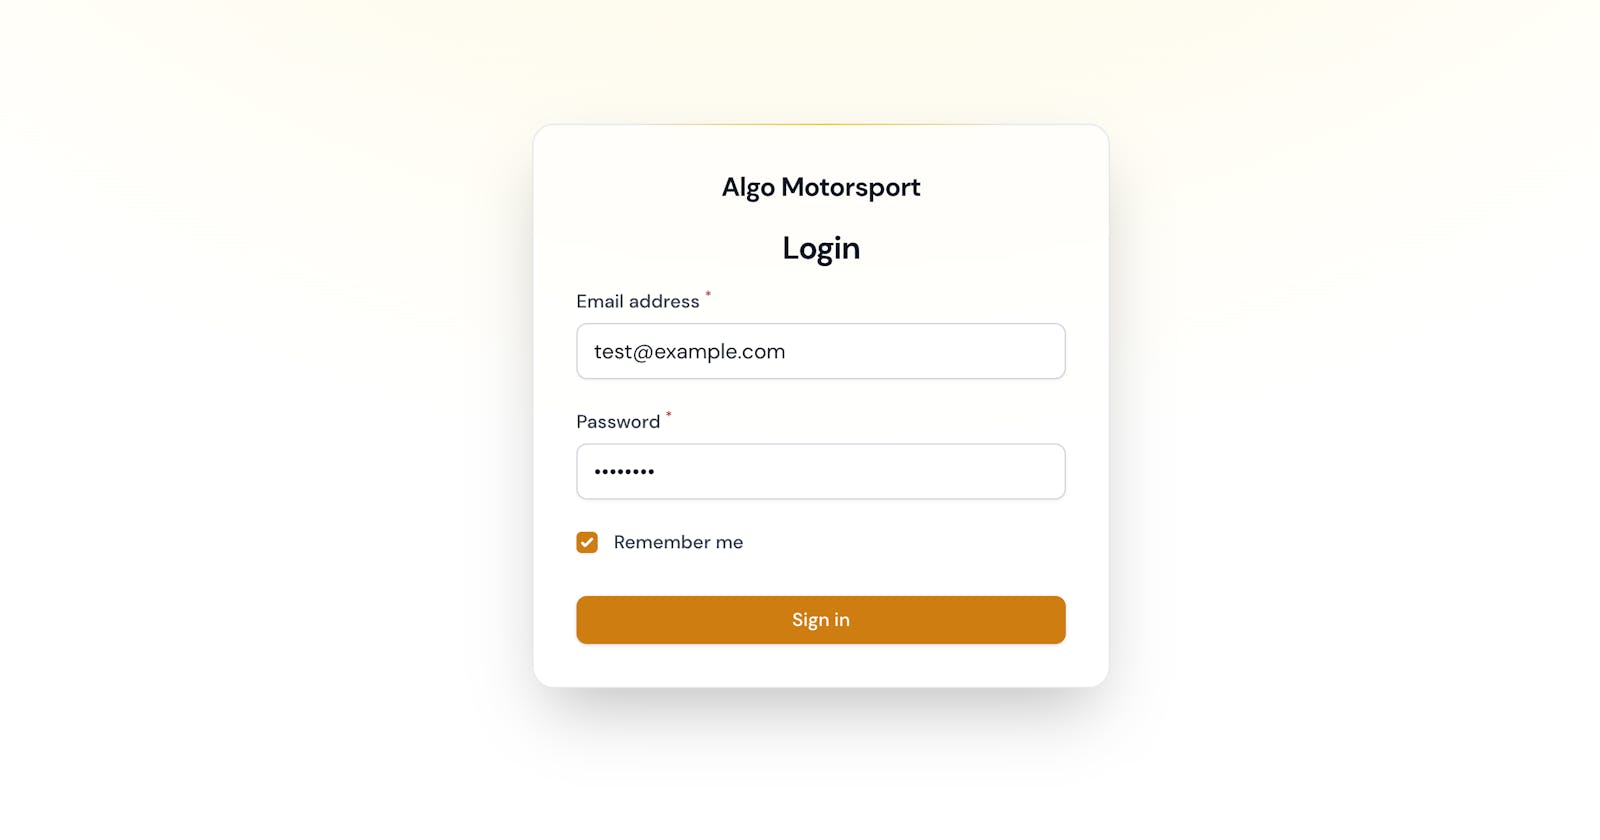 How to make Filament (V2) Login page automatically fill in a local environment